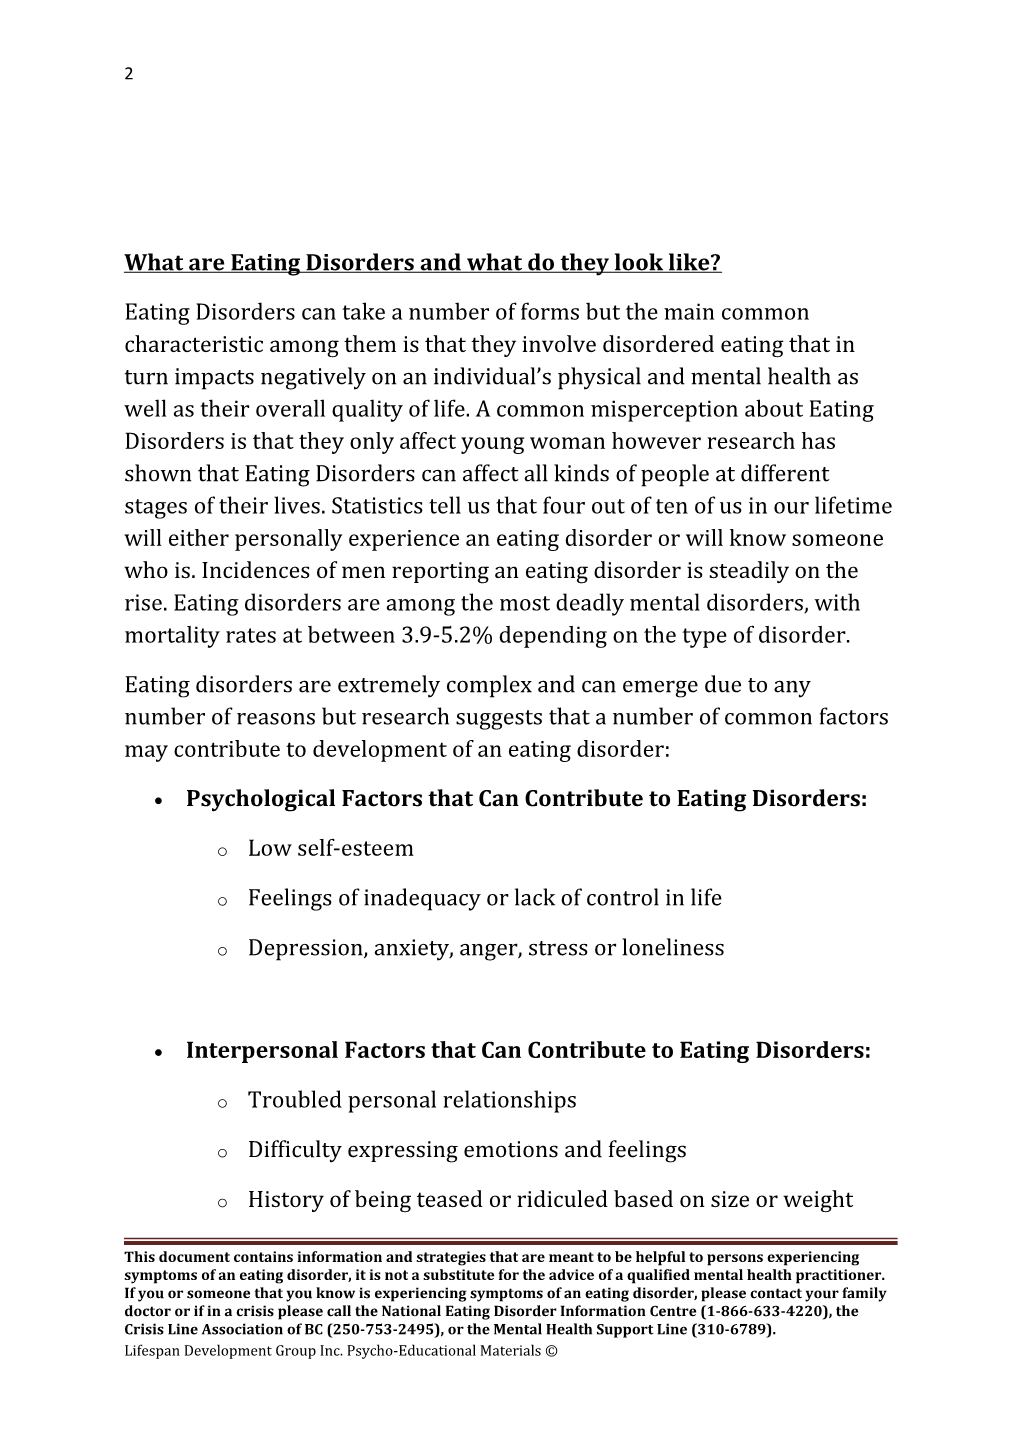 What Are Eating Disorders and What Do They Look Like?